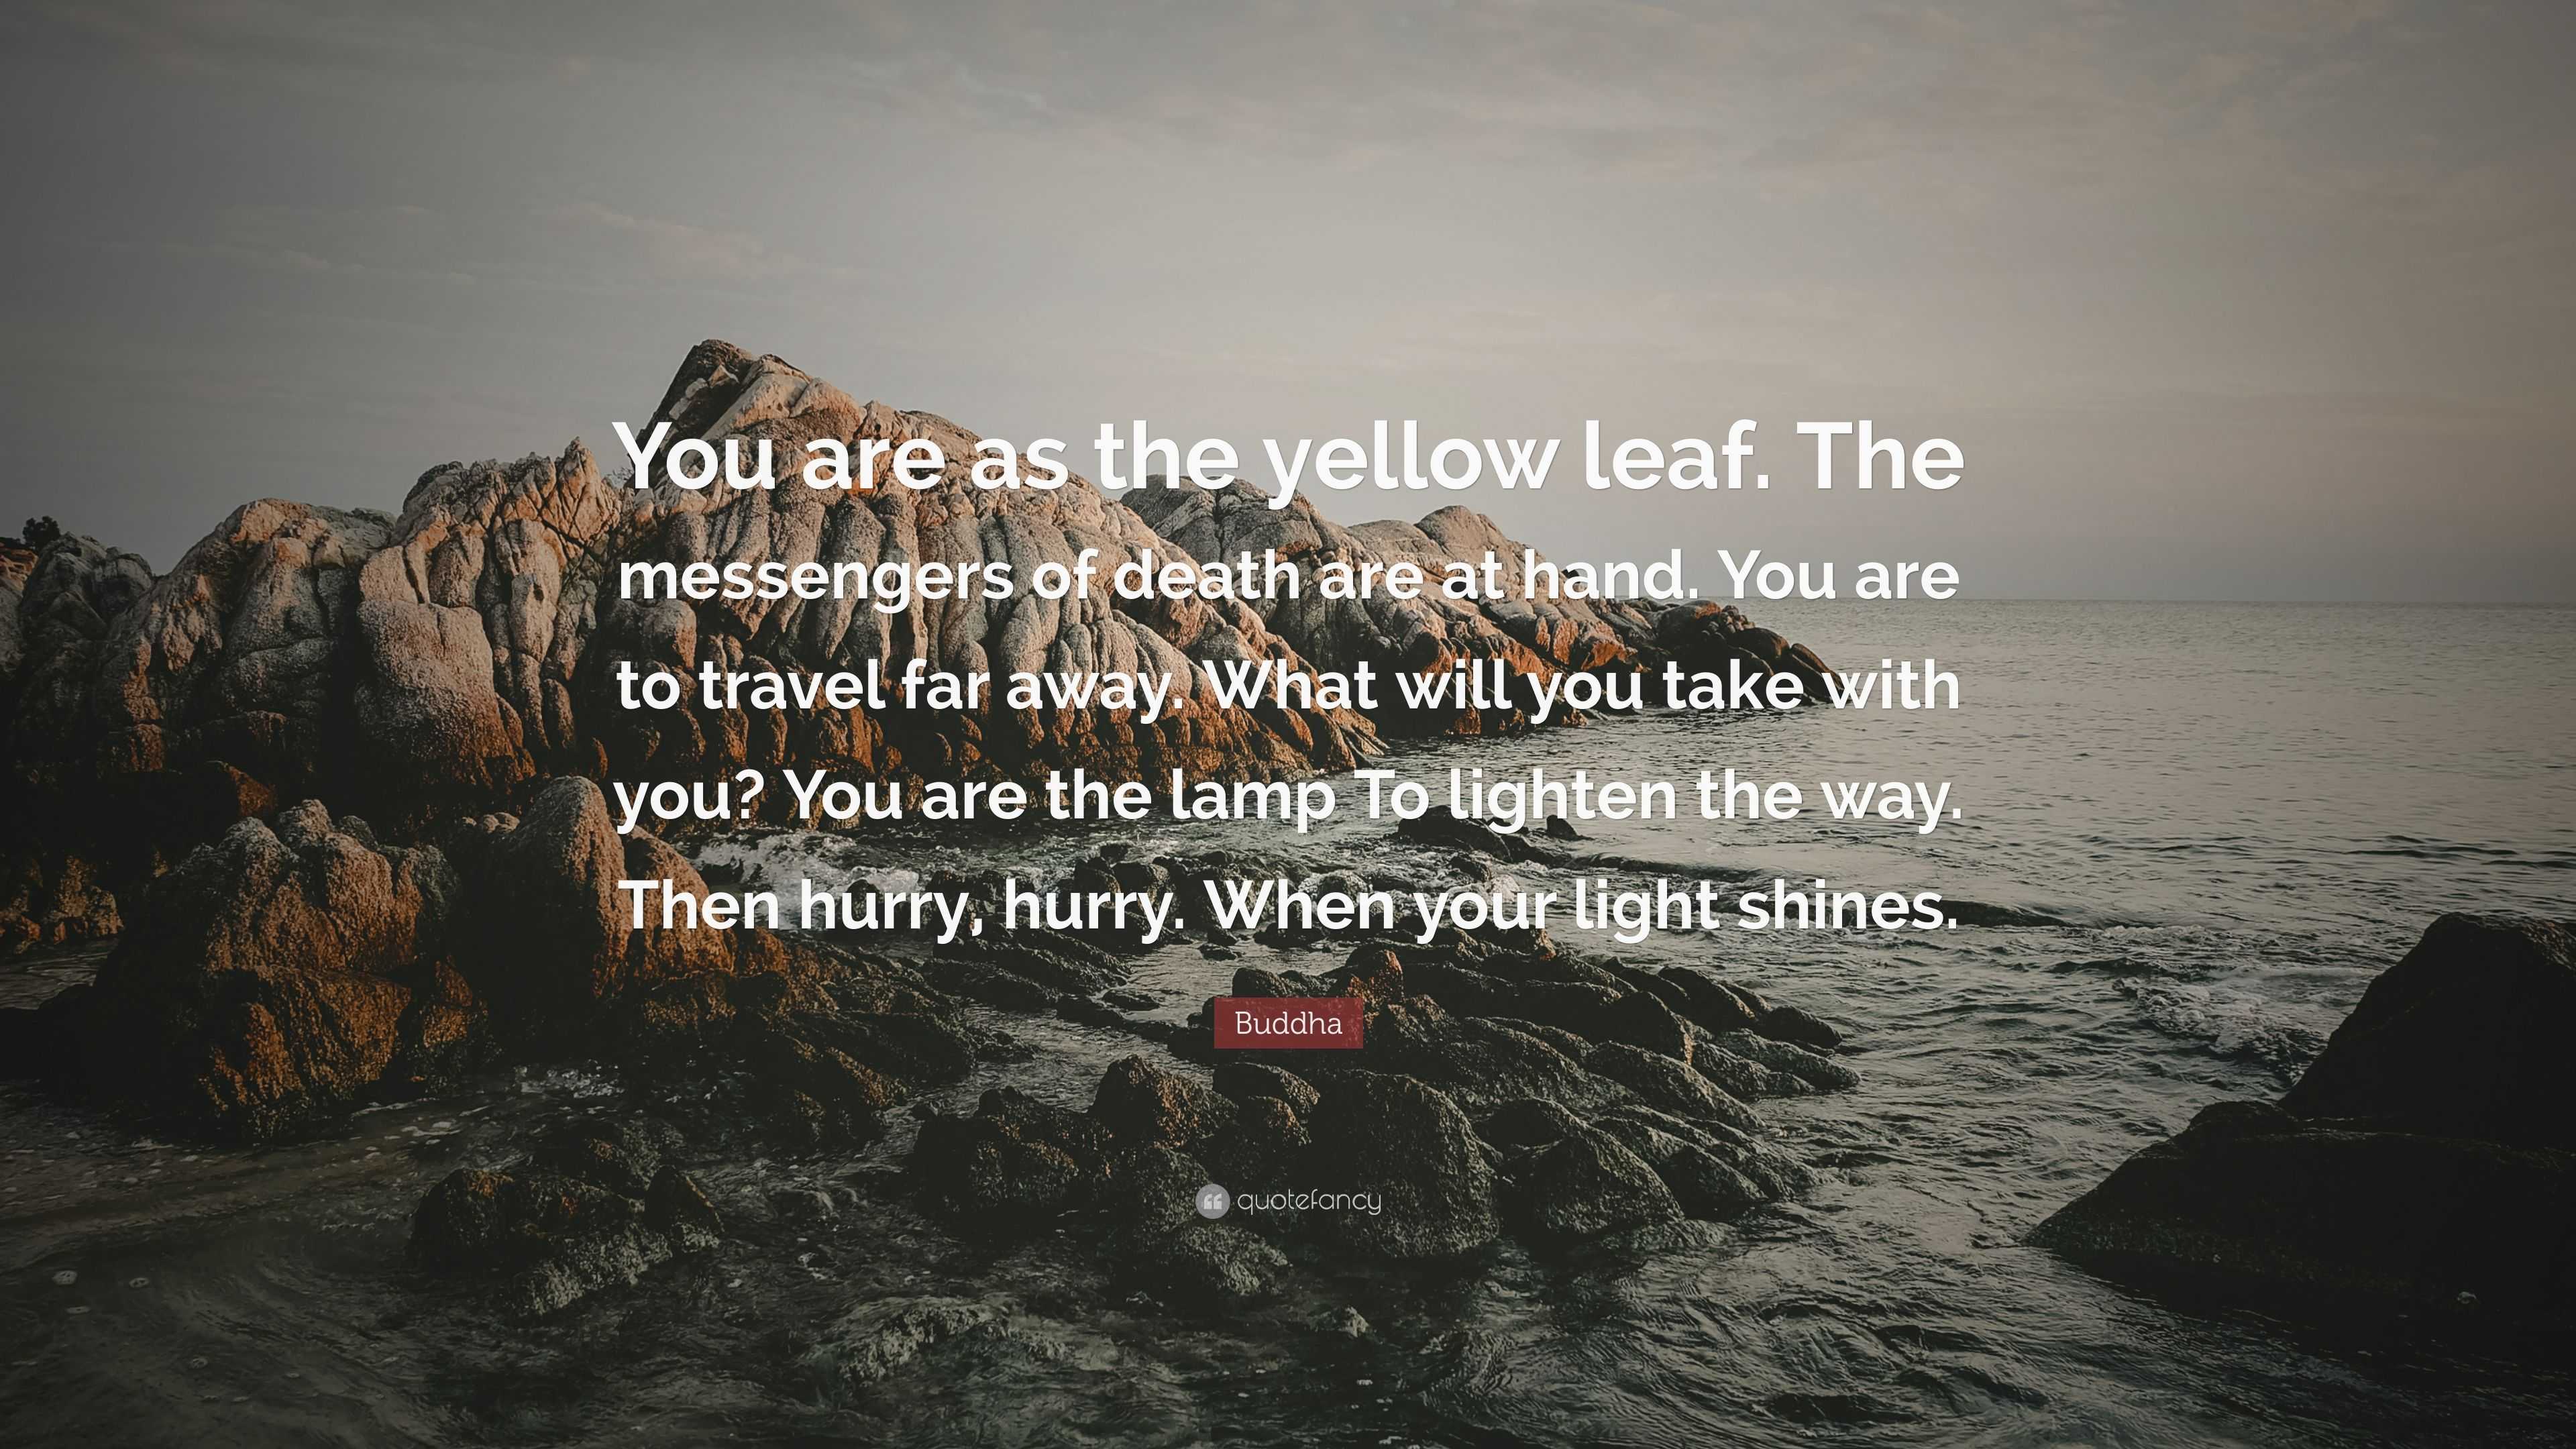 Buddha Quote You Are As The Yellow Leaf The Messengers Of Death Are At Hand You Are To Travel Far Away What Will You Take With You